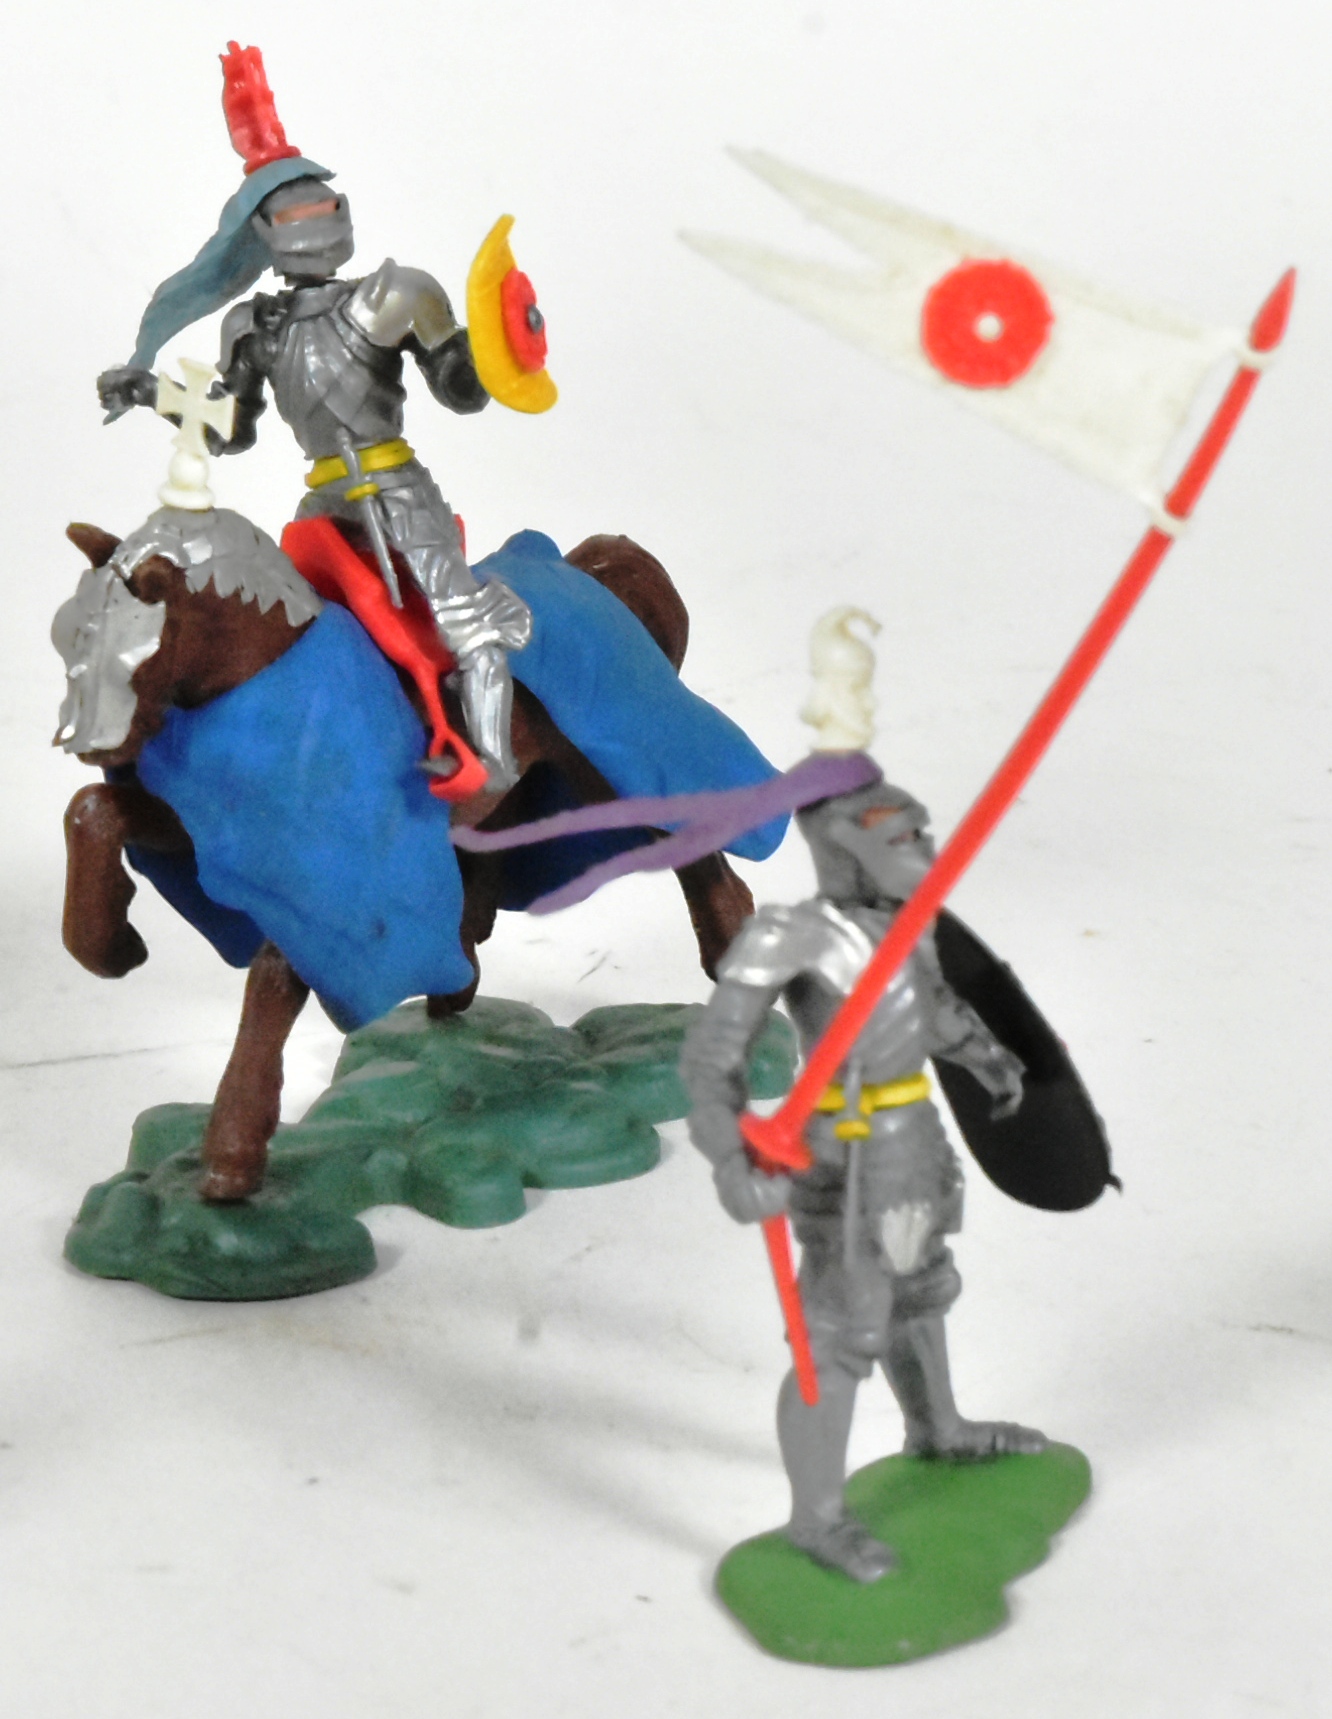 TOY SOLDIERS - COLLECTION OF BRITAINS 15TH CENTURY KNIGHTS - Image 5 of 6